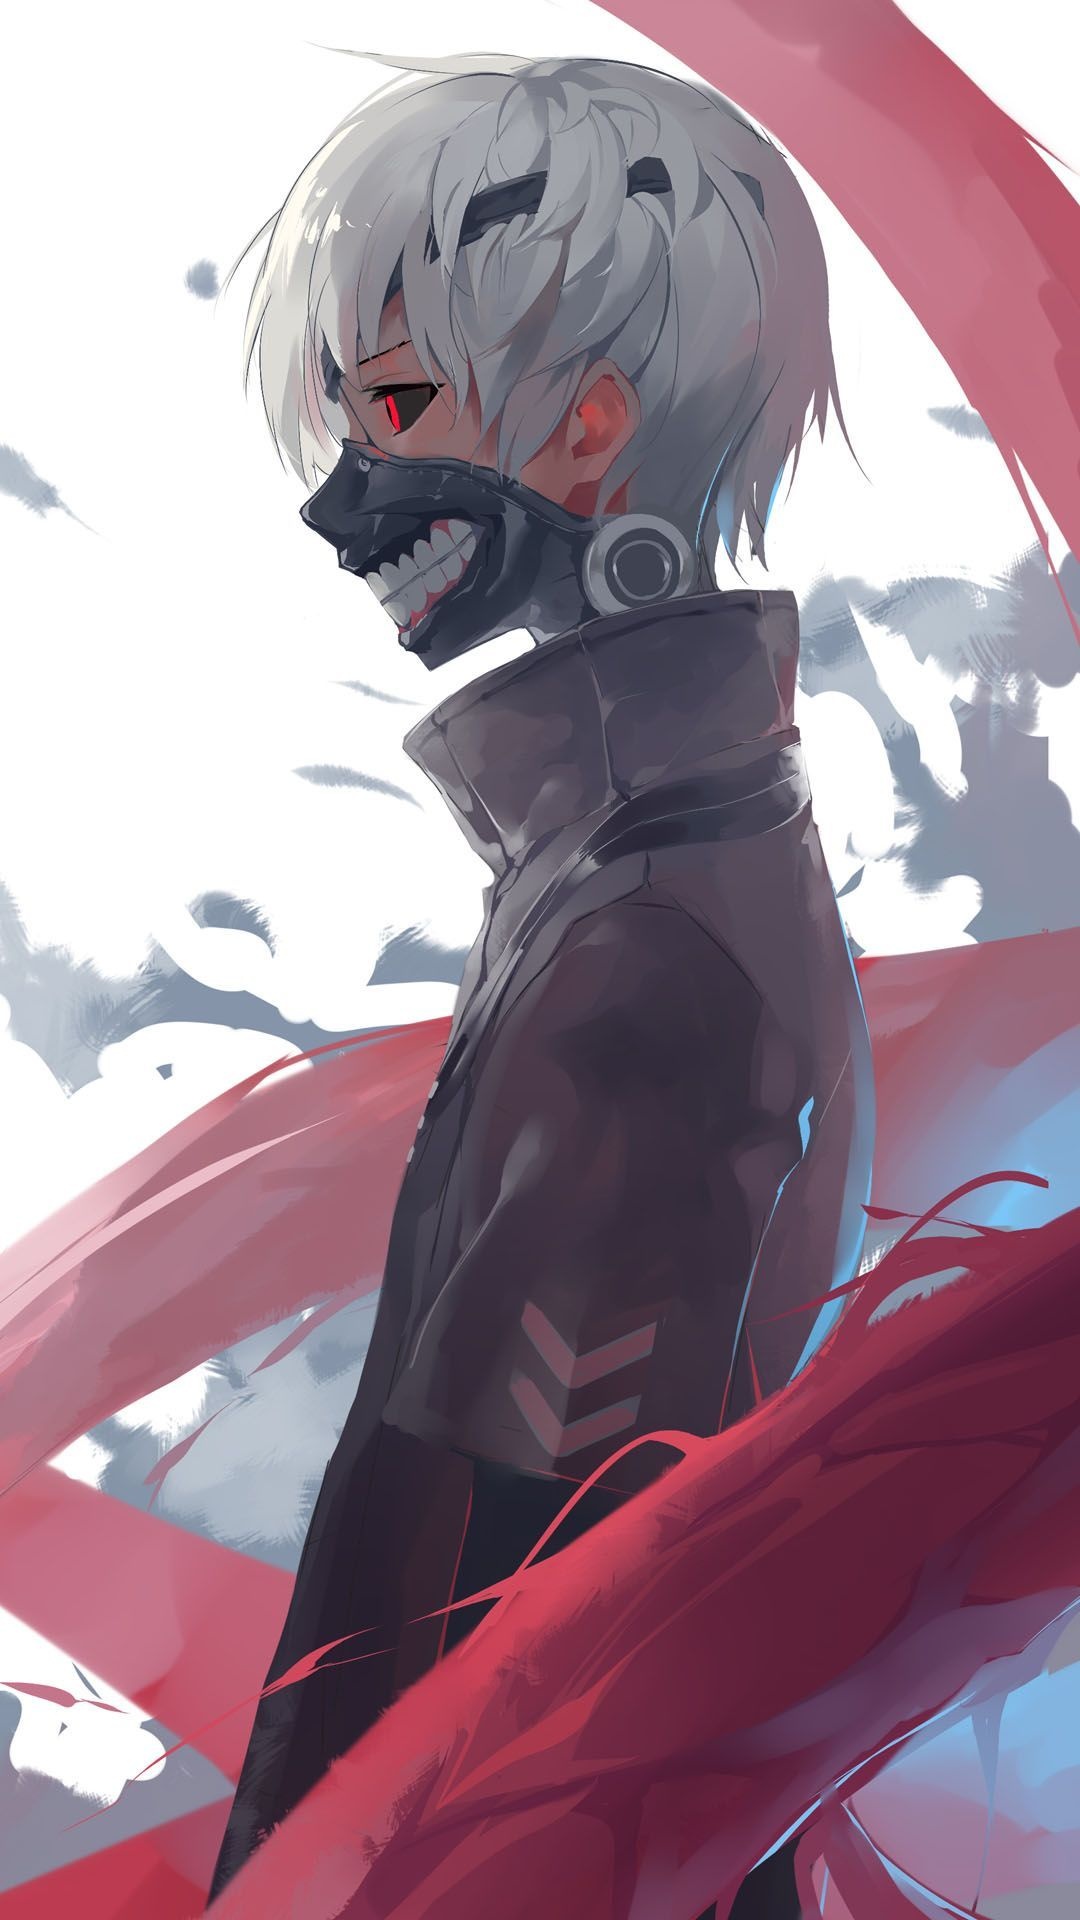 Tokyo Ghoul anime, Tokyo Ghoul wallpapers, Desktop iPhone Android, Mobile wallpapers, 1080x1920 Full HD Phone